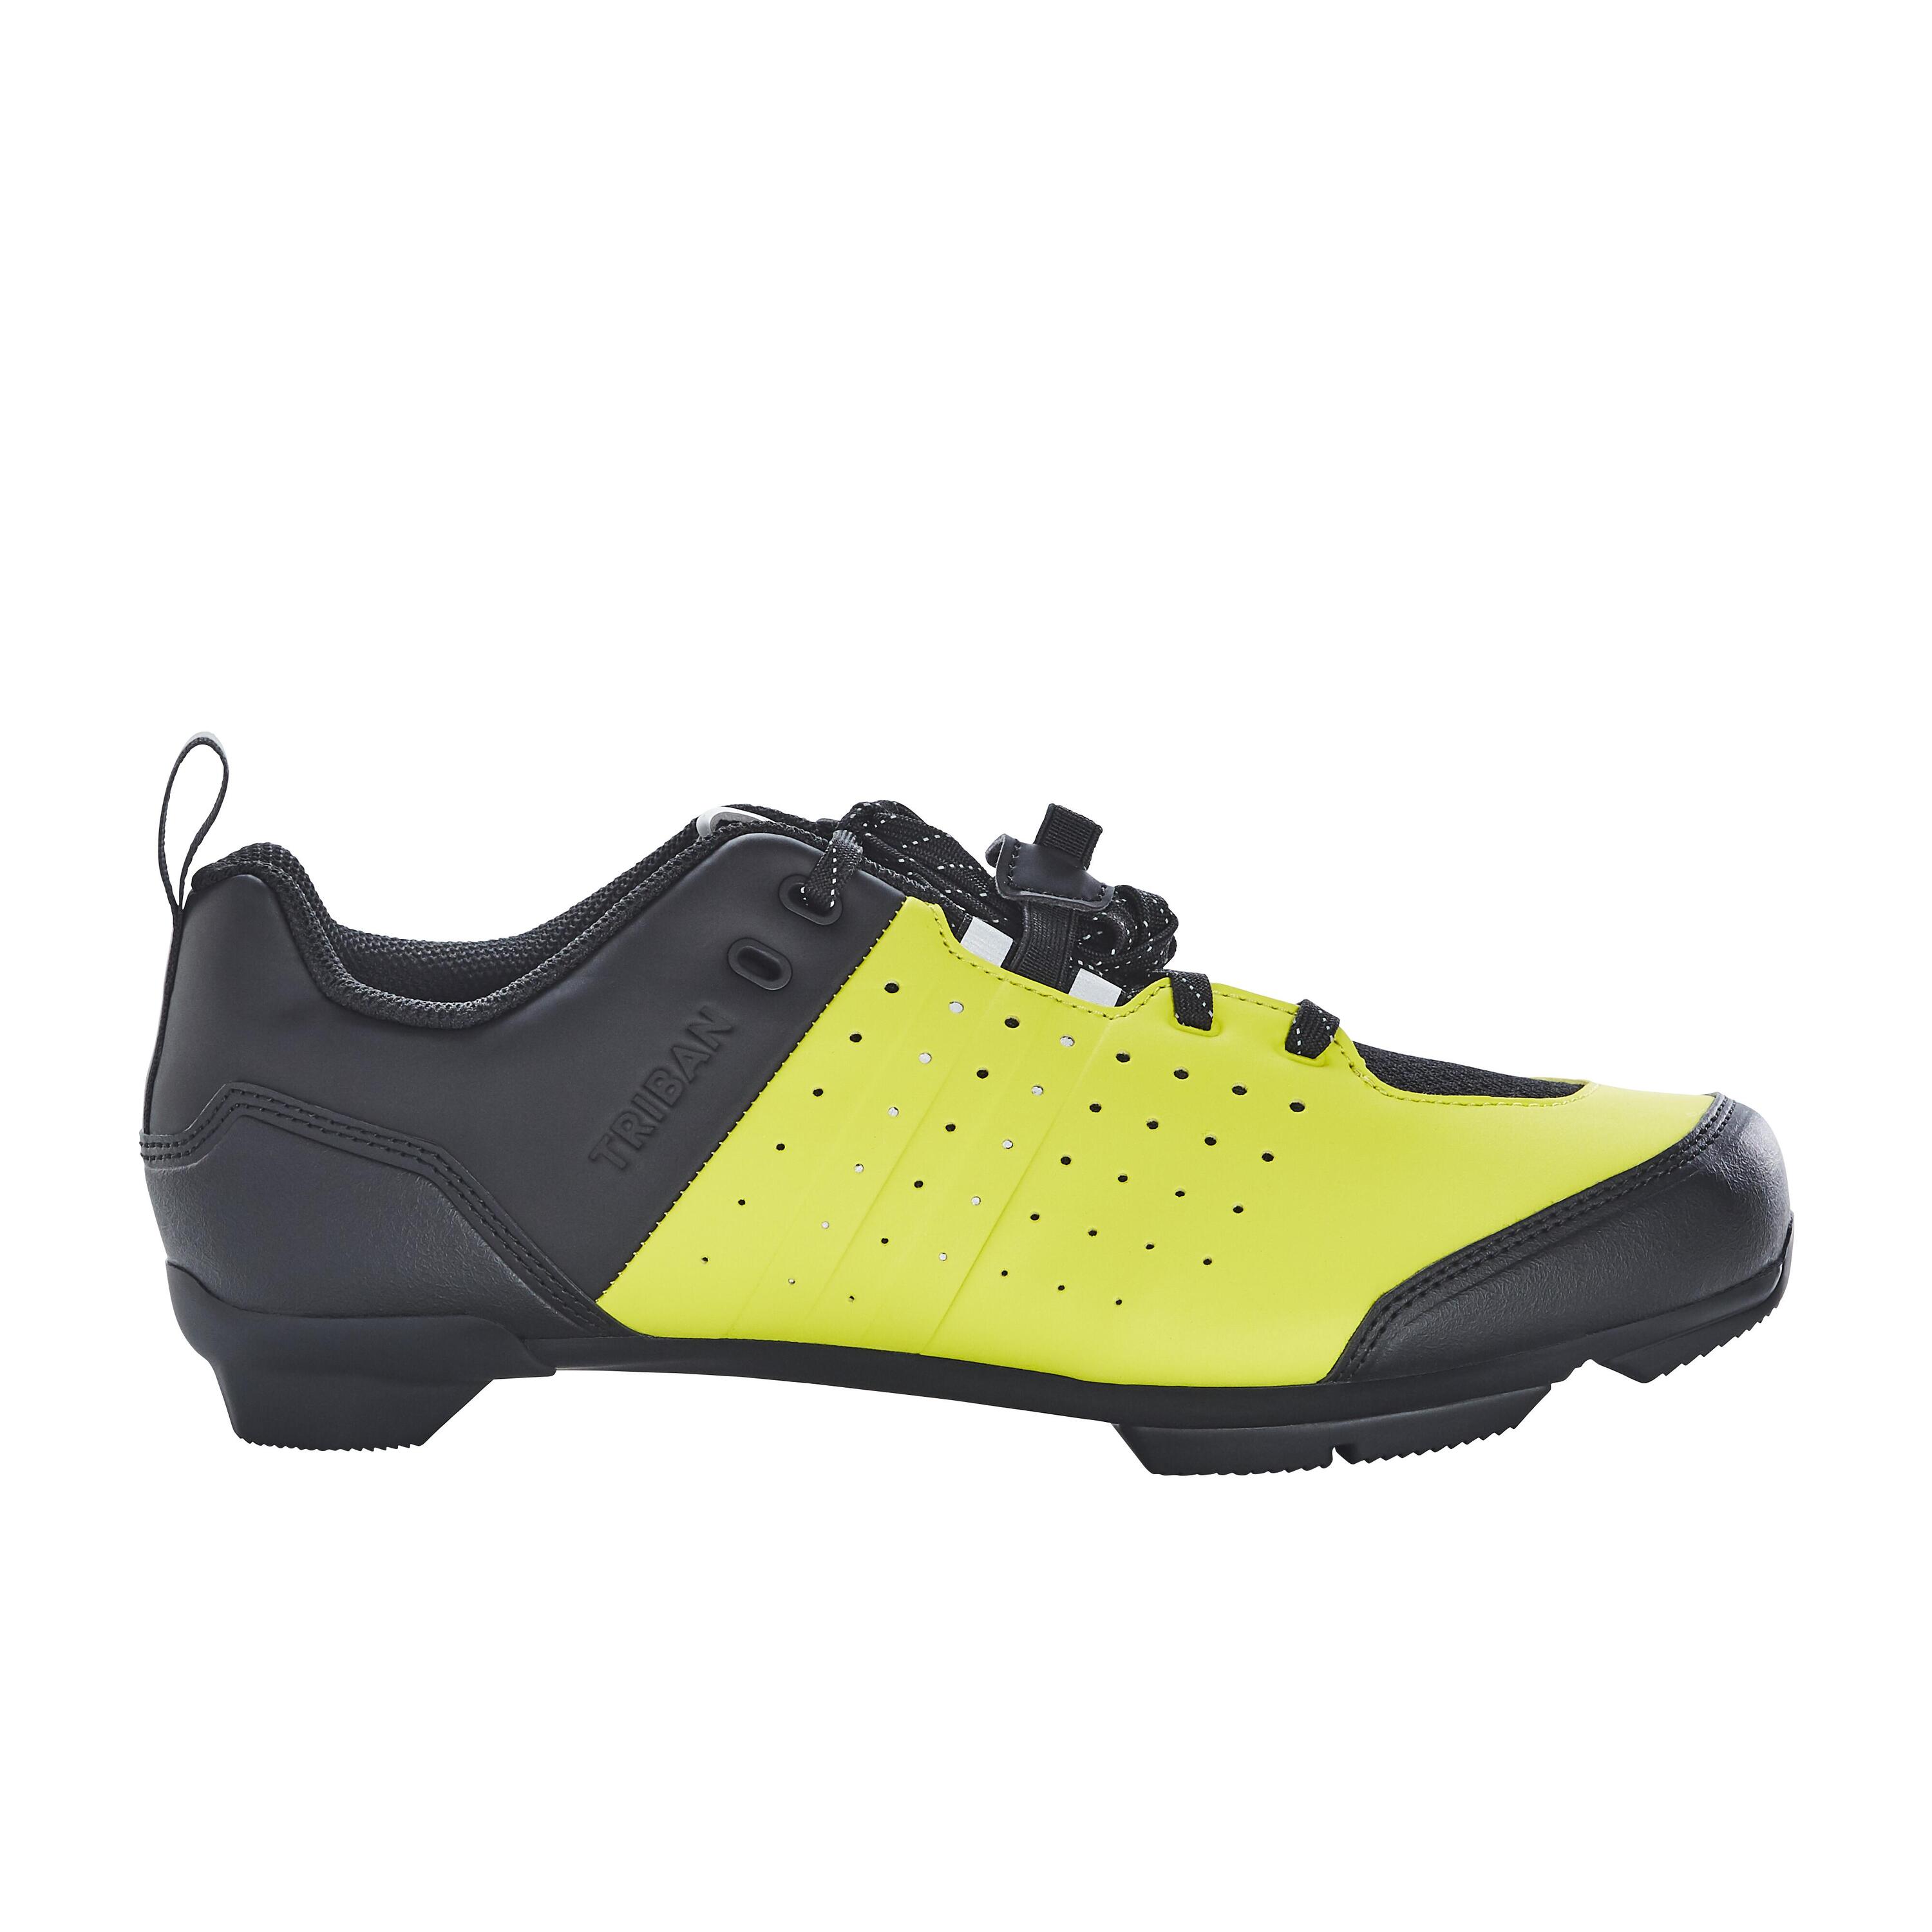 Road and Gravel Cycling Lace-Up SPD Shoes GRVL 500 - Yellow 3/5